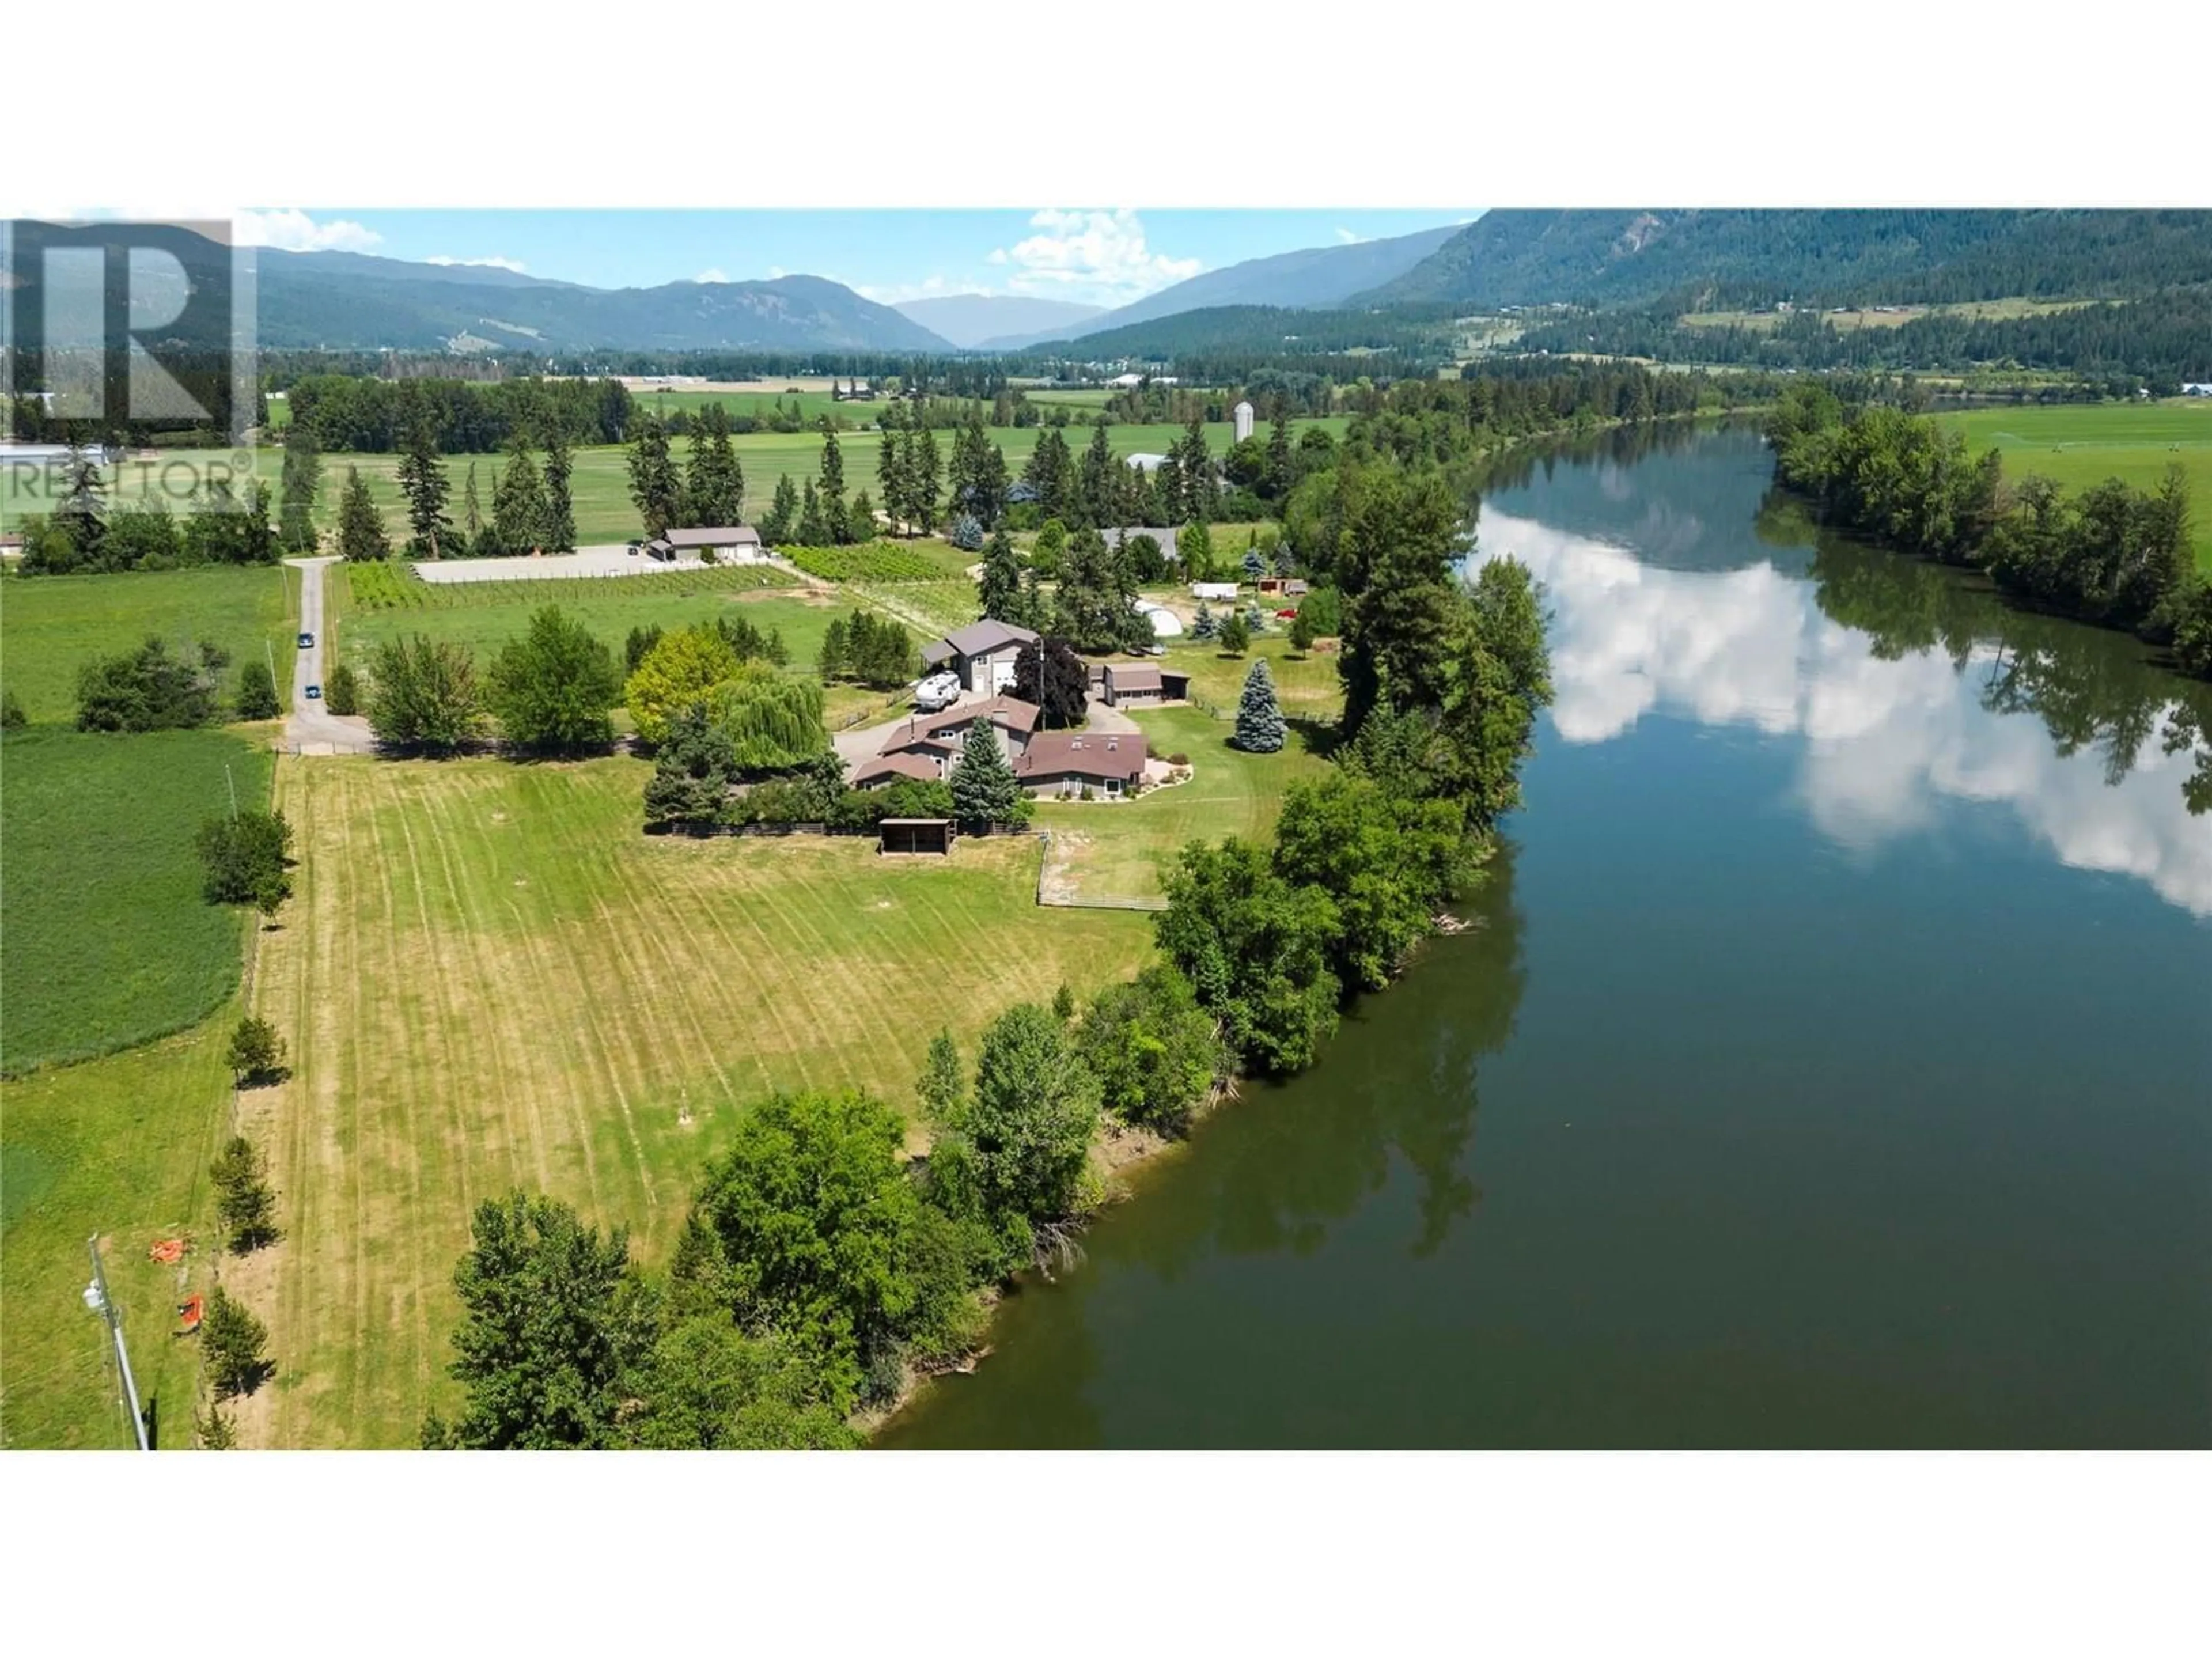 Lakeview for 48 Waterside Road, Enderby British Columbia V0E1V3